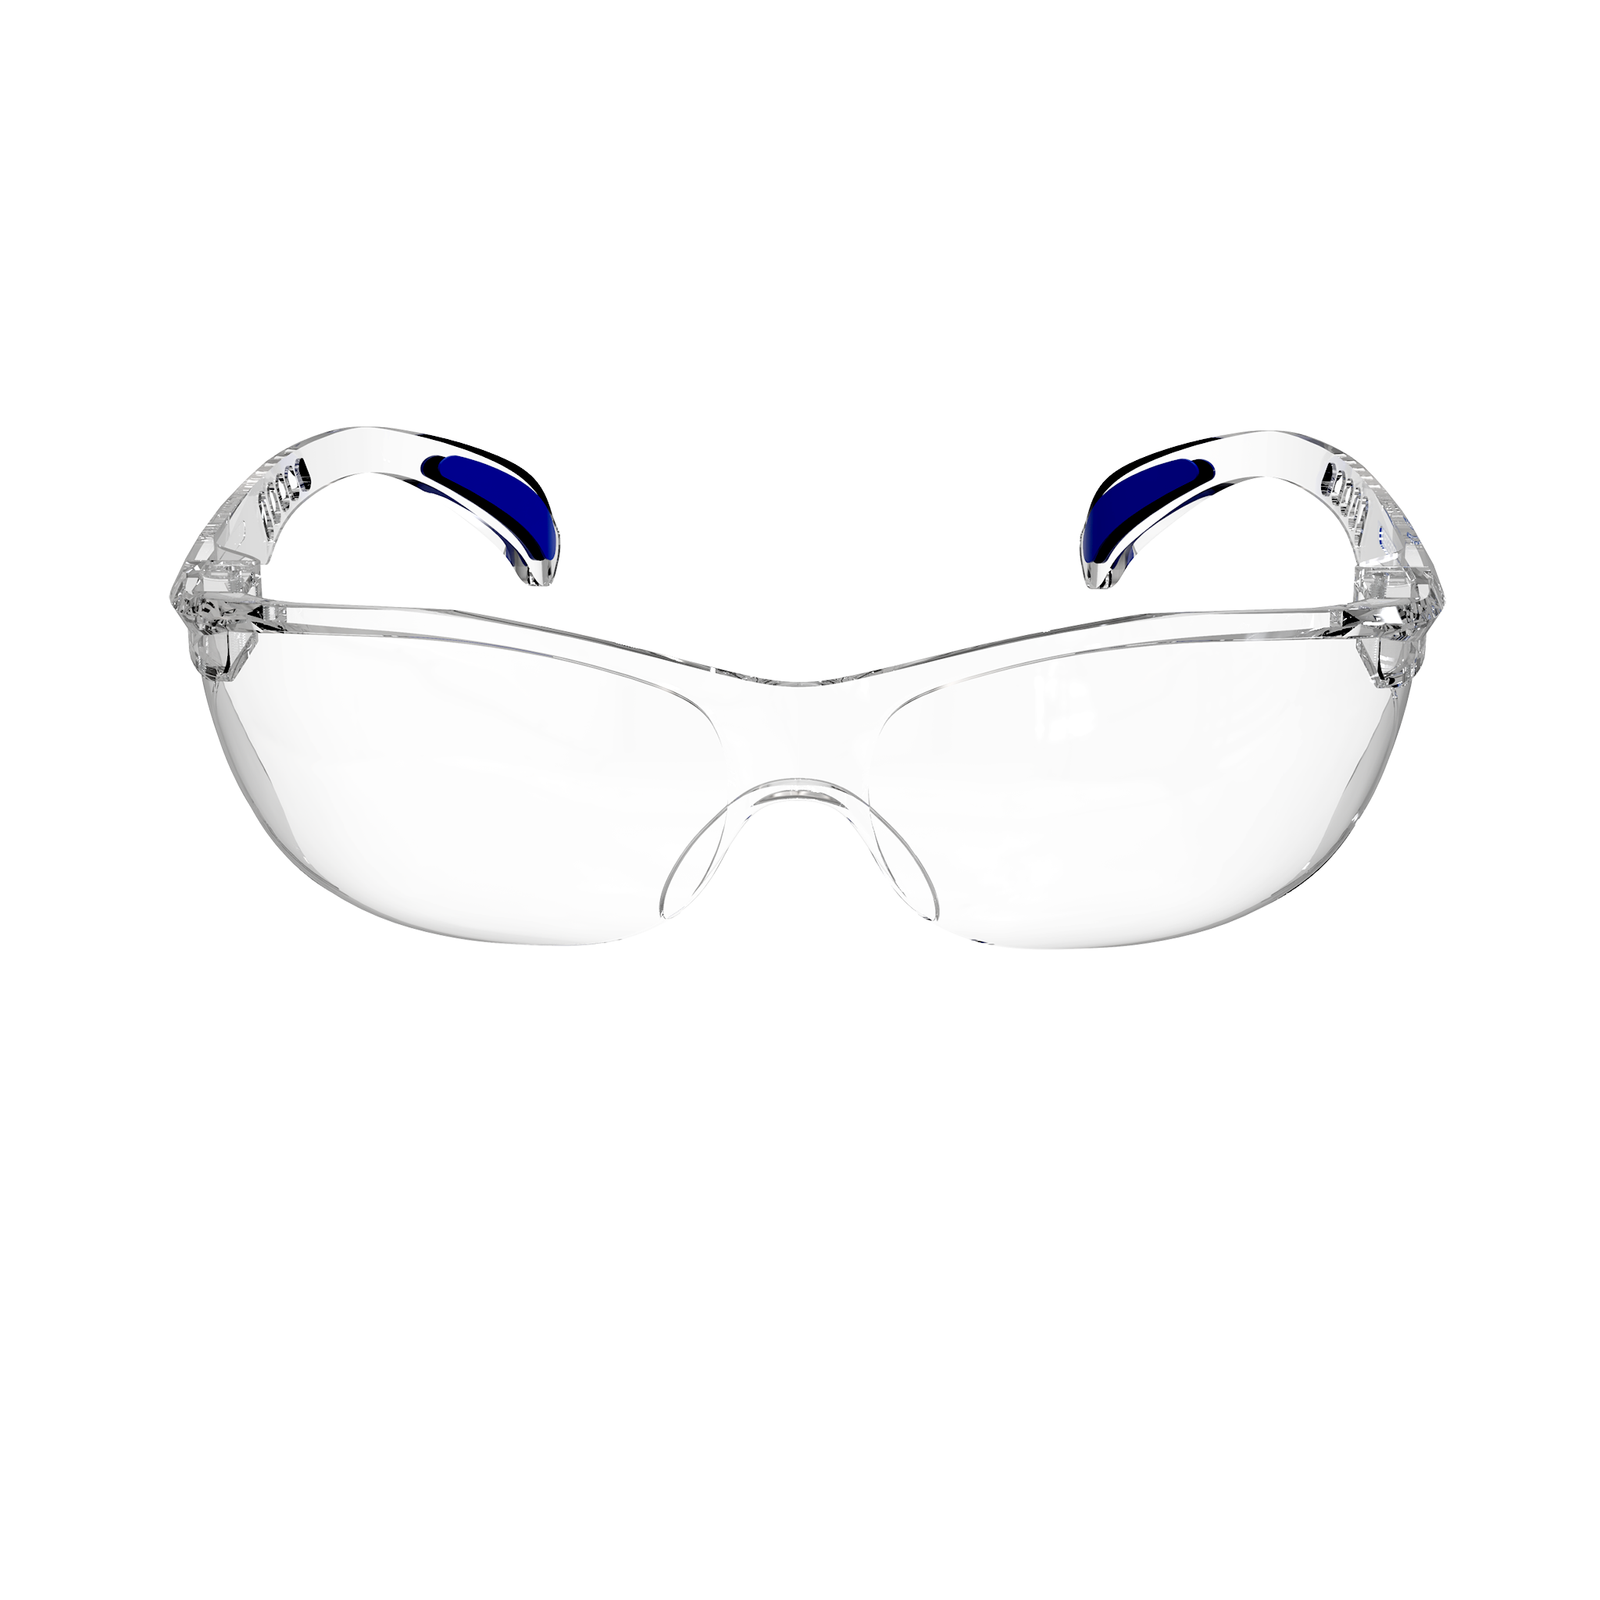 Front view of the clear JORESTECH panoramic safety glass for high impact protection.  Temples of this ANSI compliant glasses have details in blue. 